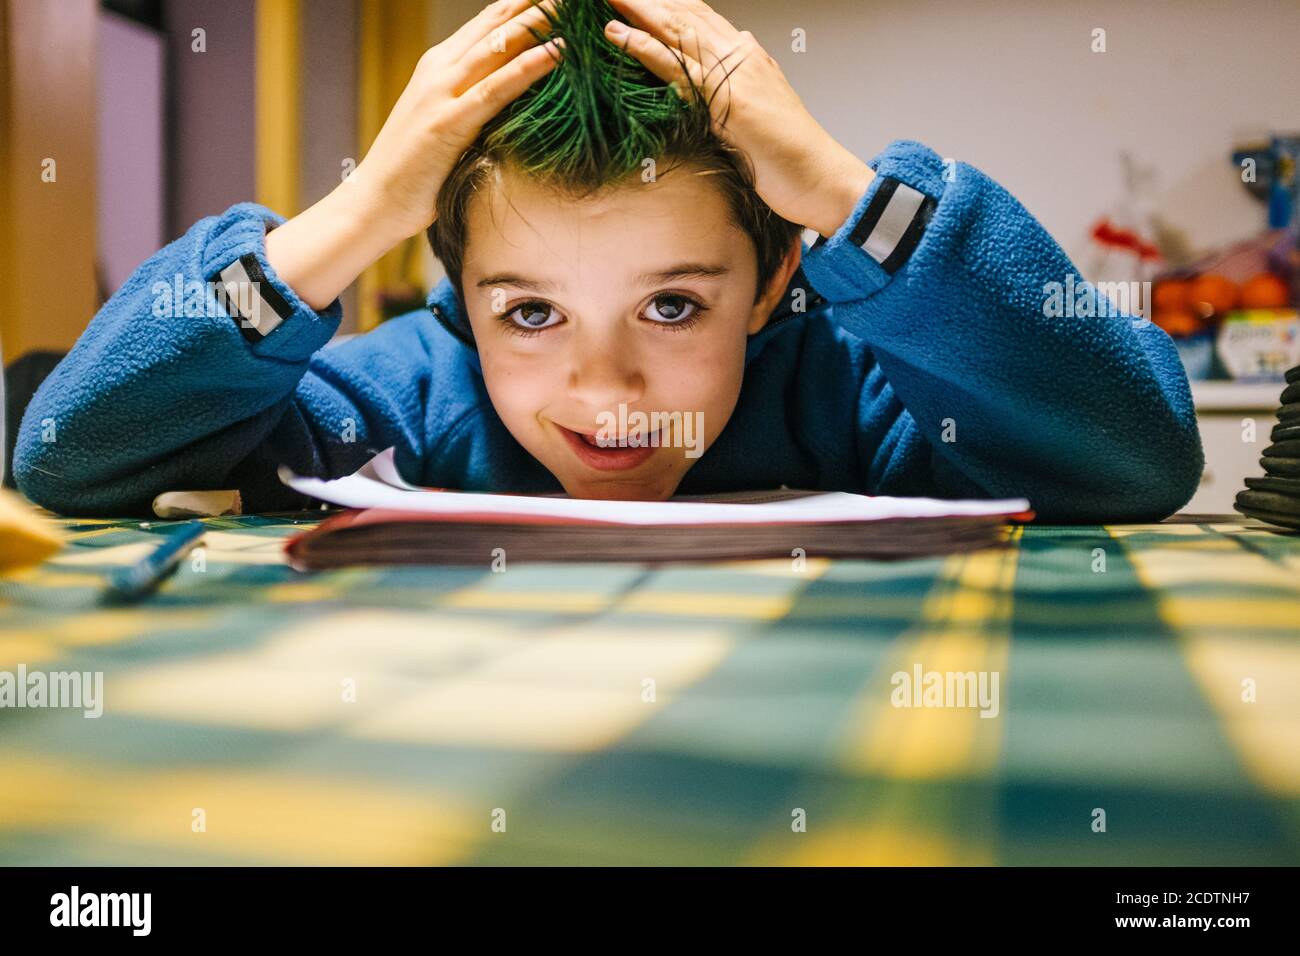 portrait of 9 year old baby boy with crest of green colored hair Stock Photo